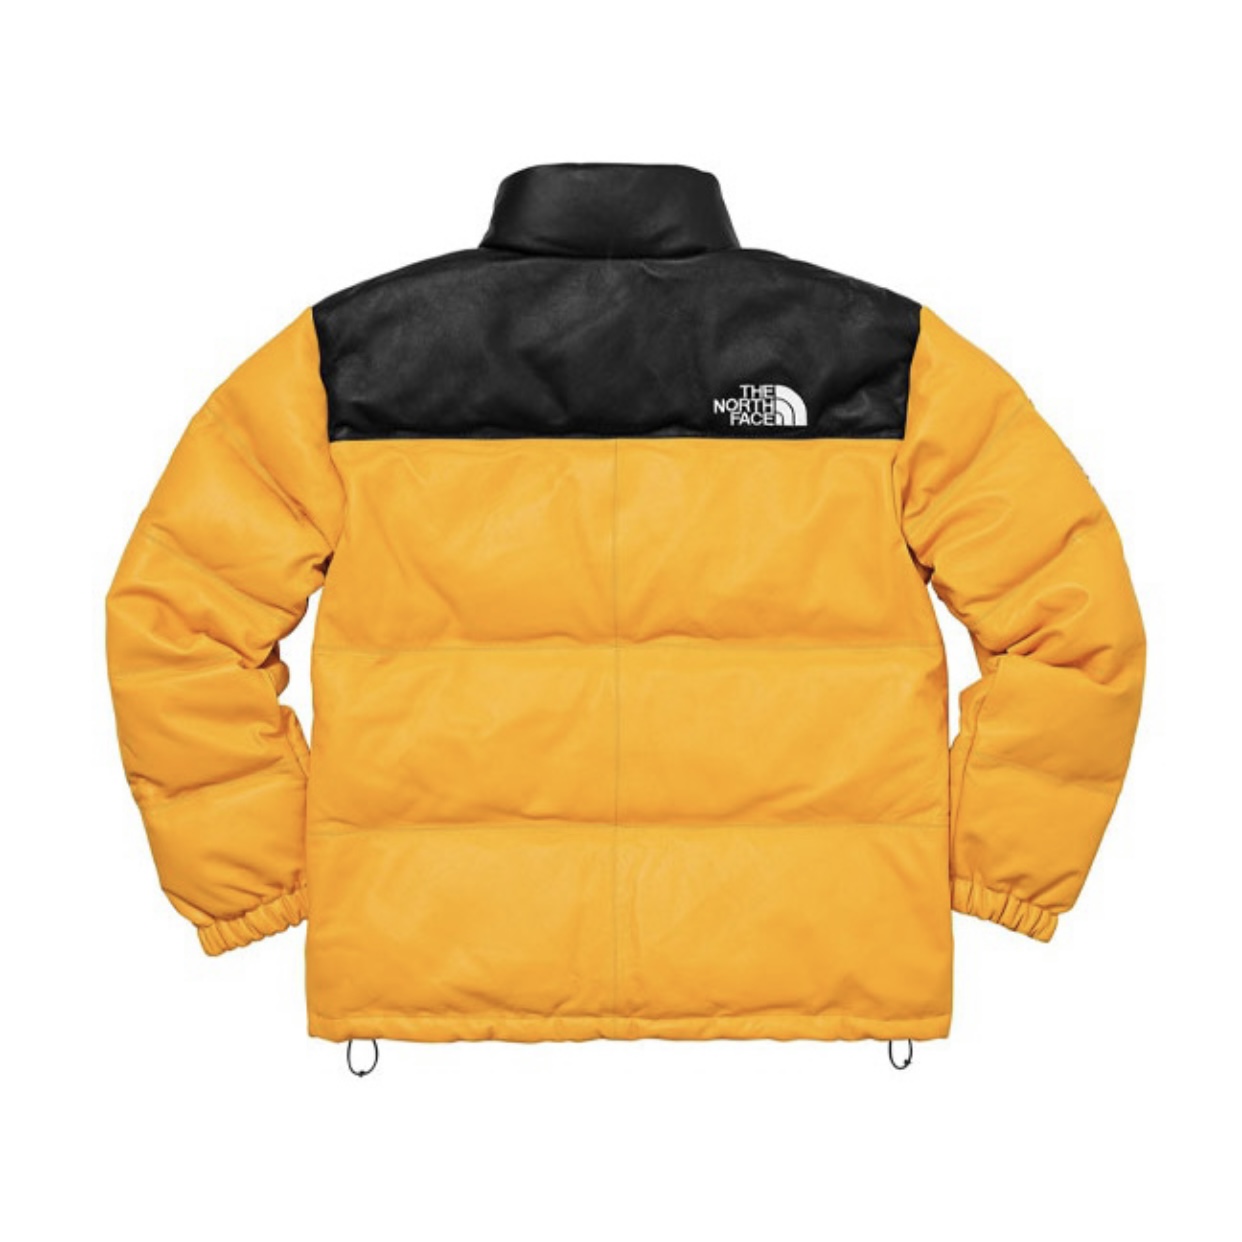 SUPREME×THE NORTH FACE 17FW LEATHER NUPTSE JACKET シュプリーム 